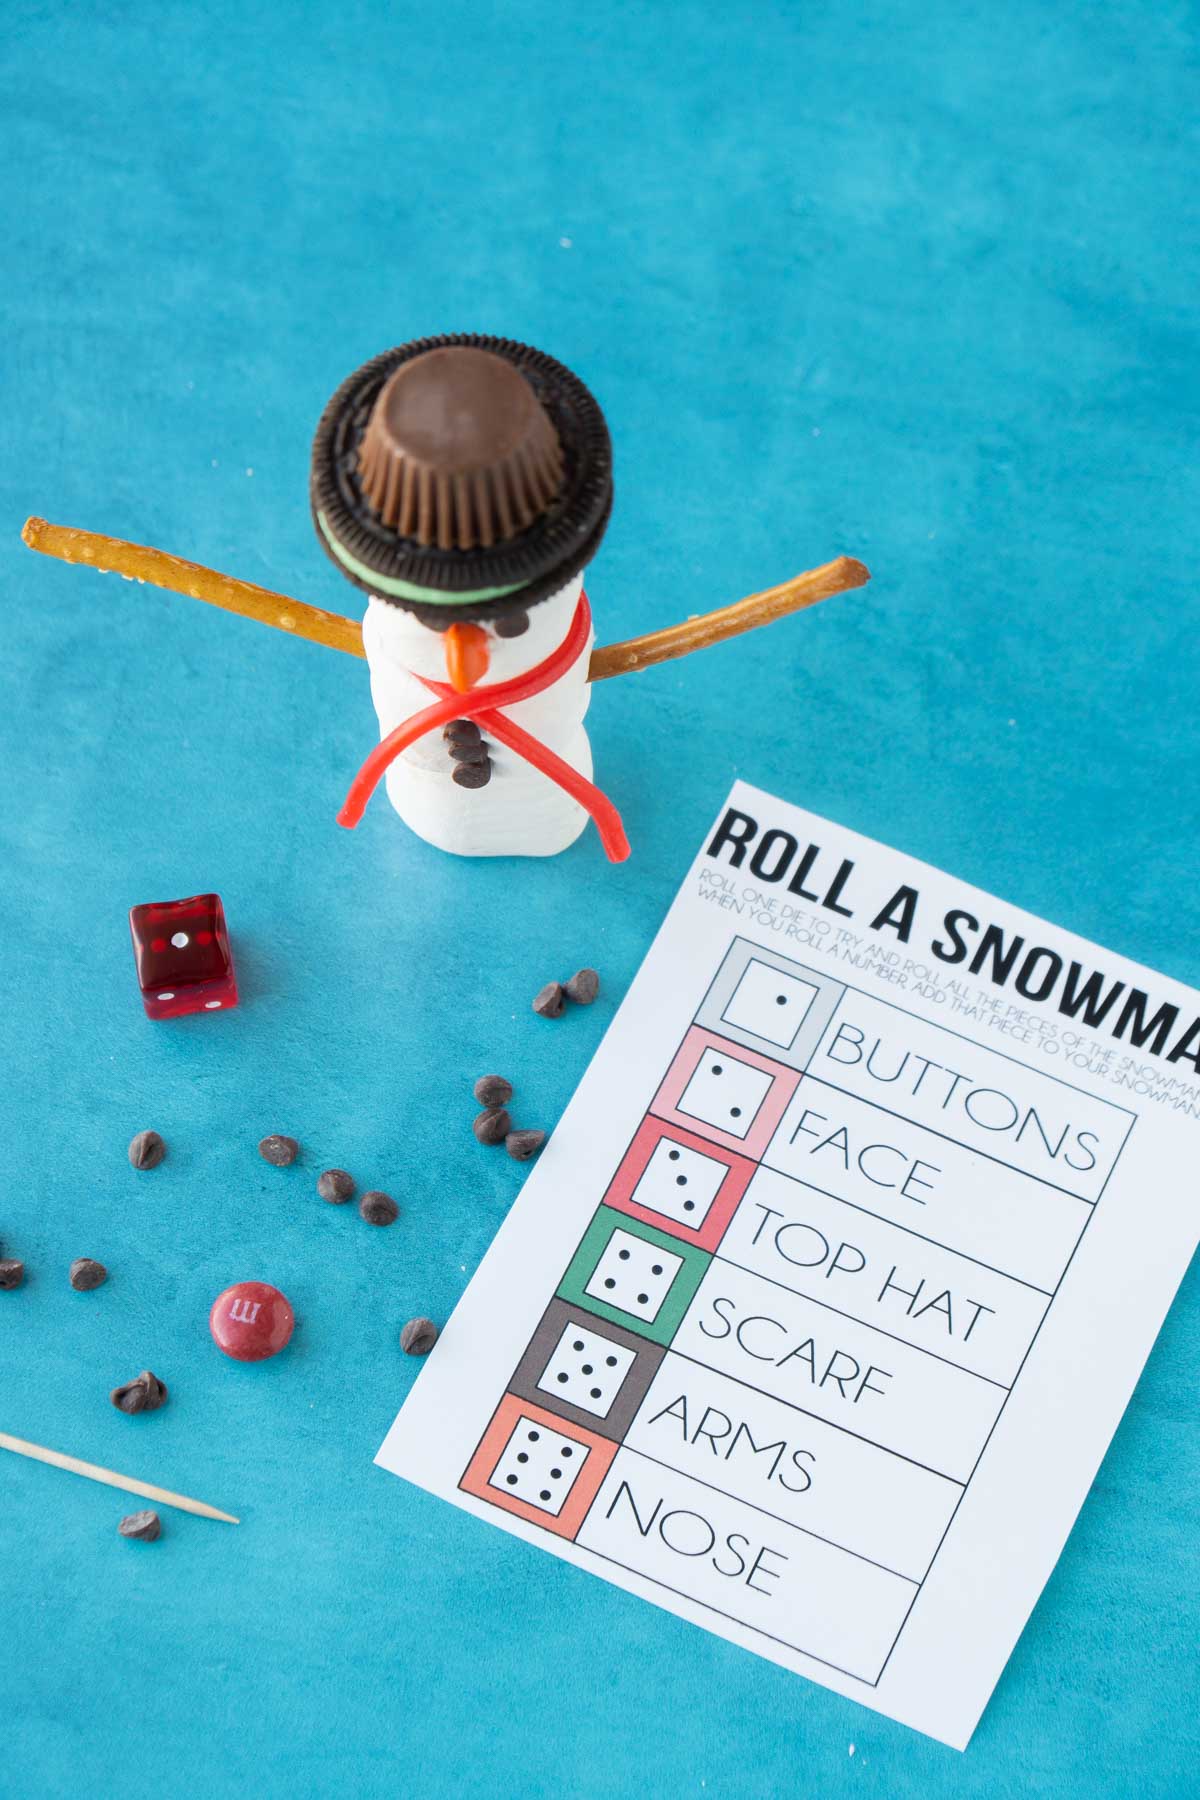 a marshmallow snowman and roll a snowman playing cards